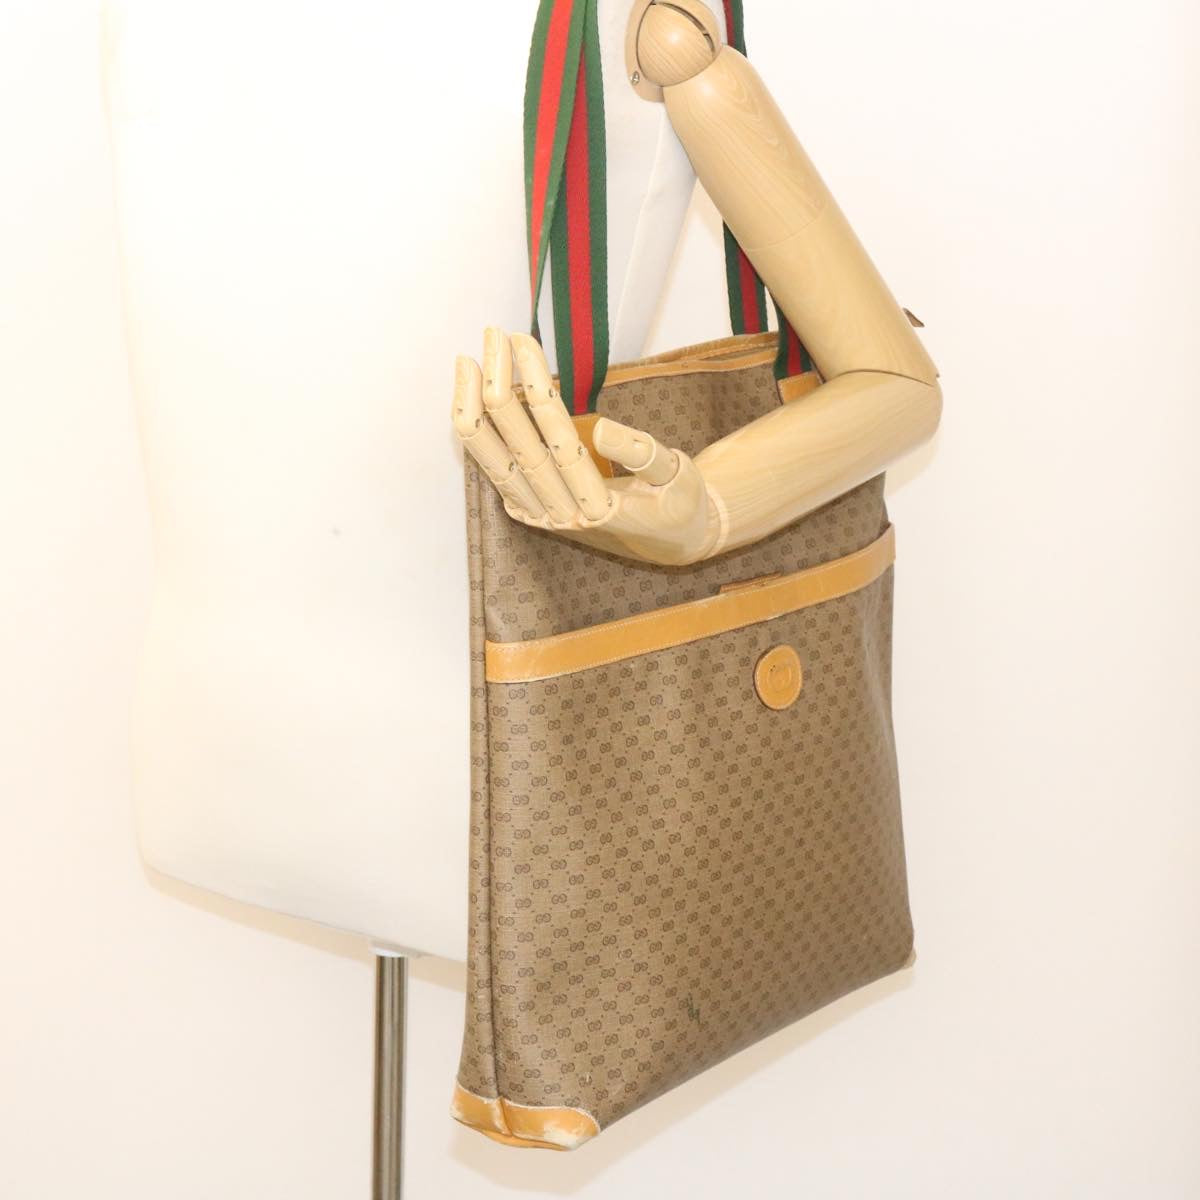 GUCCI Web Sherry Line Micro GG Canvas Tote Bag Beige Red Green Auth im299